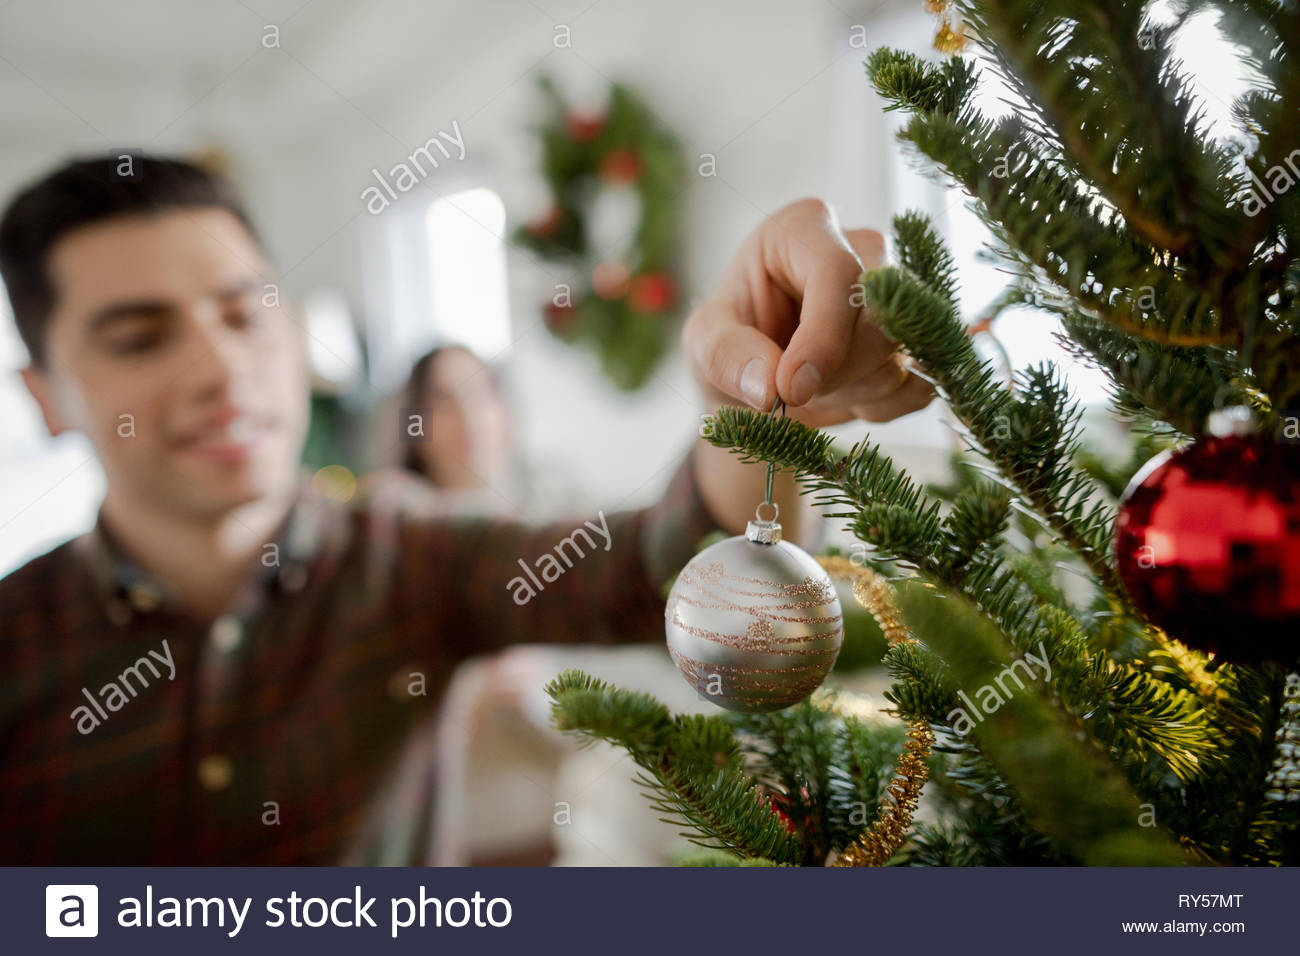 Young man hanging ornament on christmas tree Stock Photo